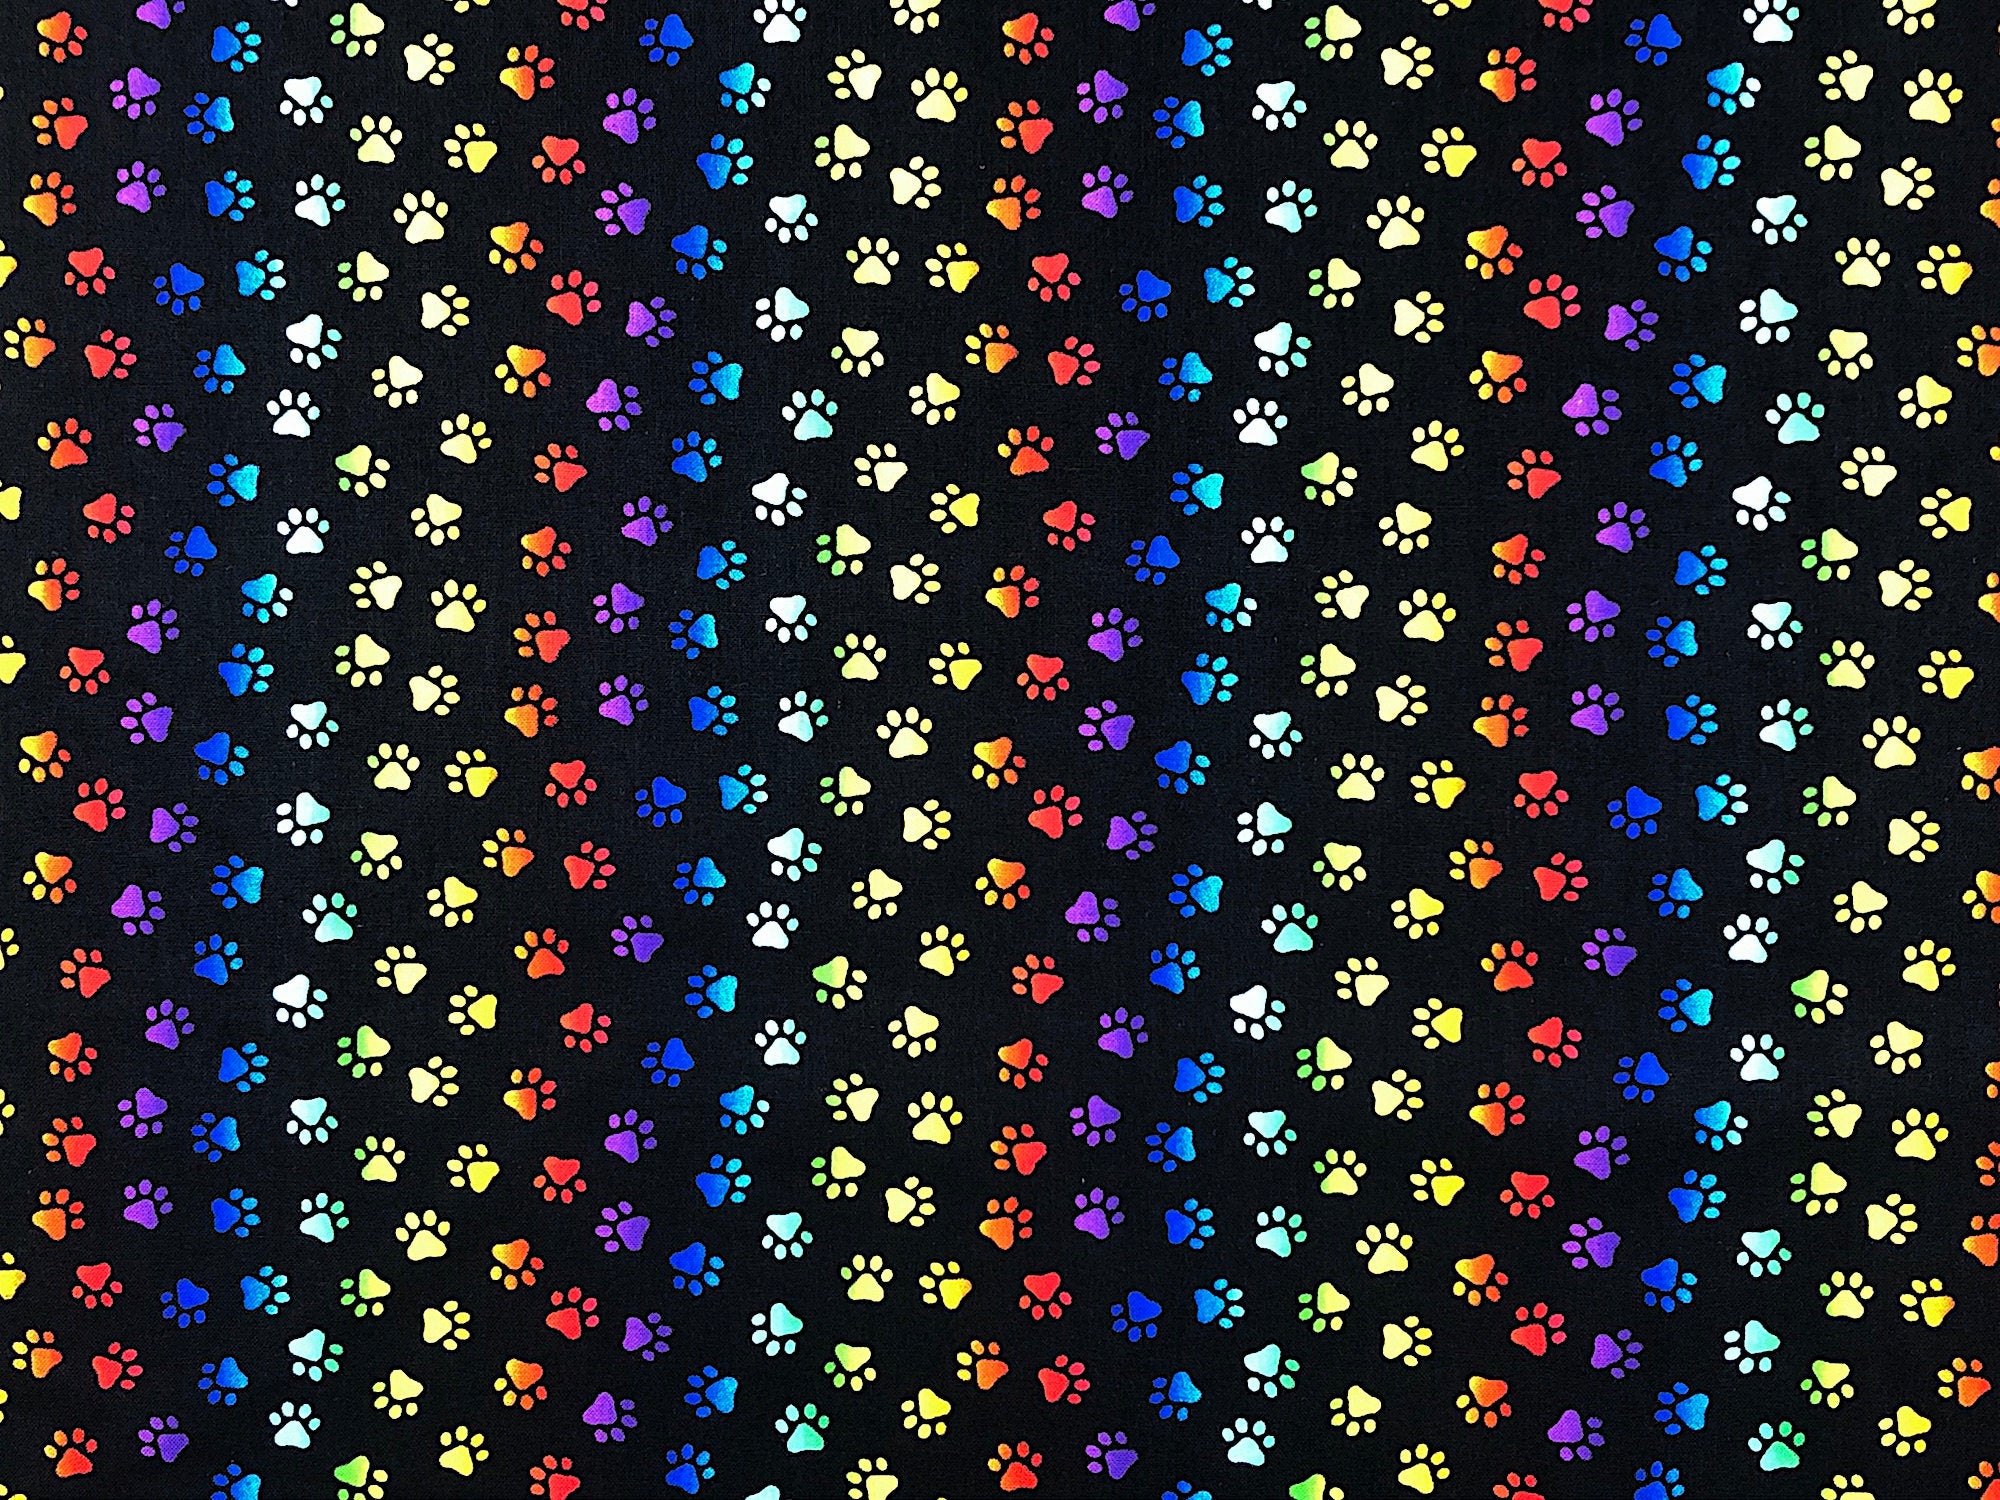 This fabric is called Neon Cat Paw prints. This black fabric is covered with red, orange, yellow, green, blue and purple paw prints.